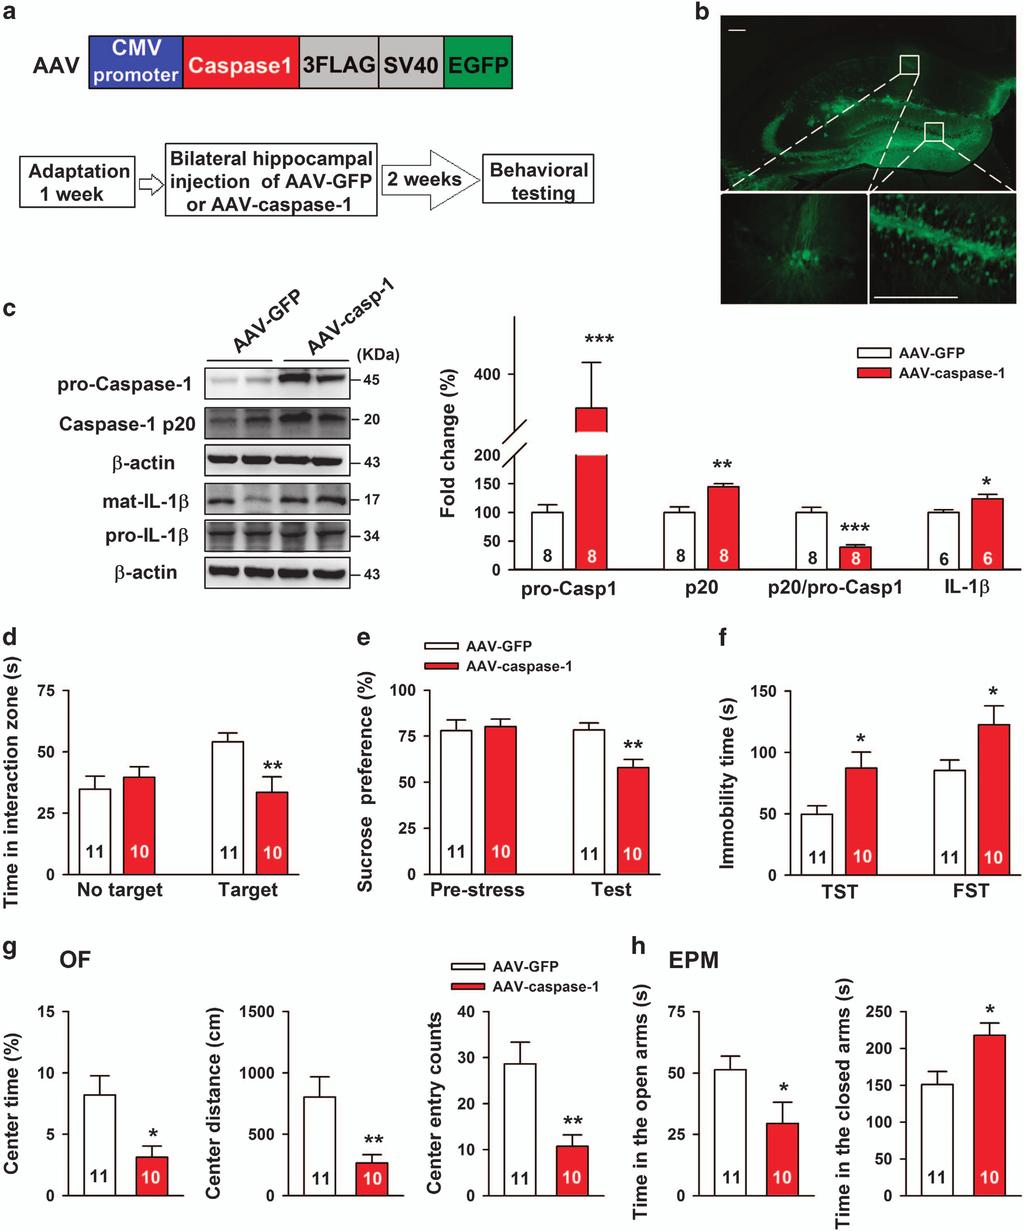 6 Figure 2. Overexpression of caspase-1 in the hippocampus increases depression- and anxiety-like behaviors.